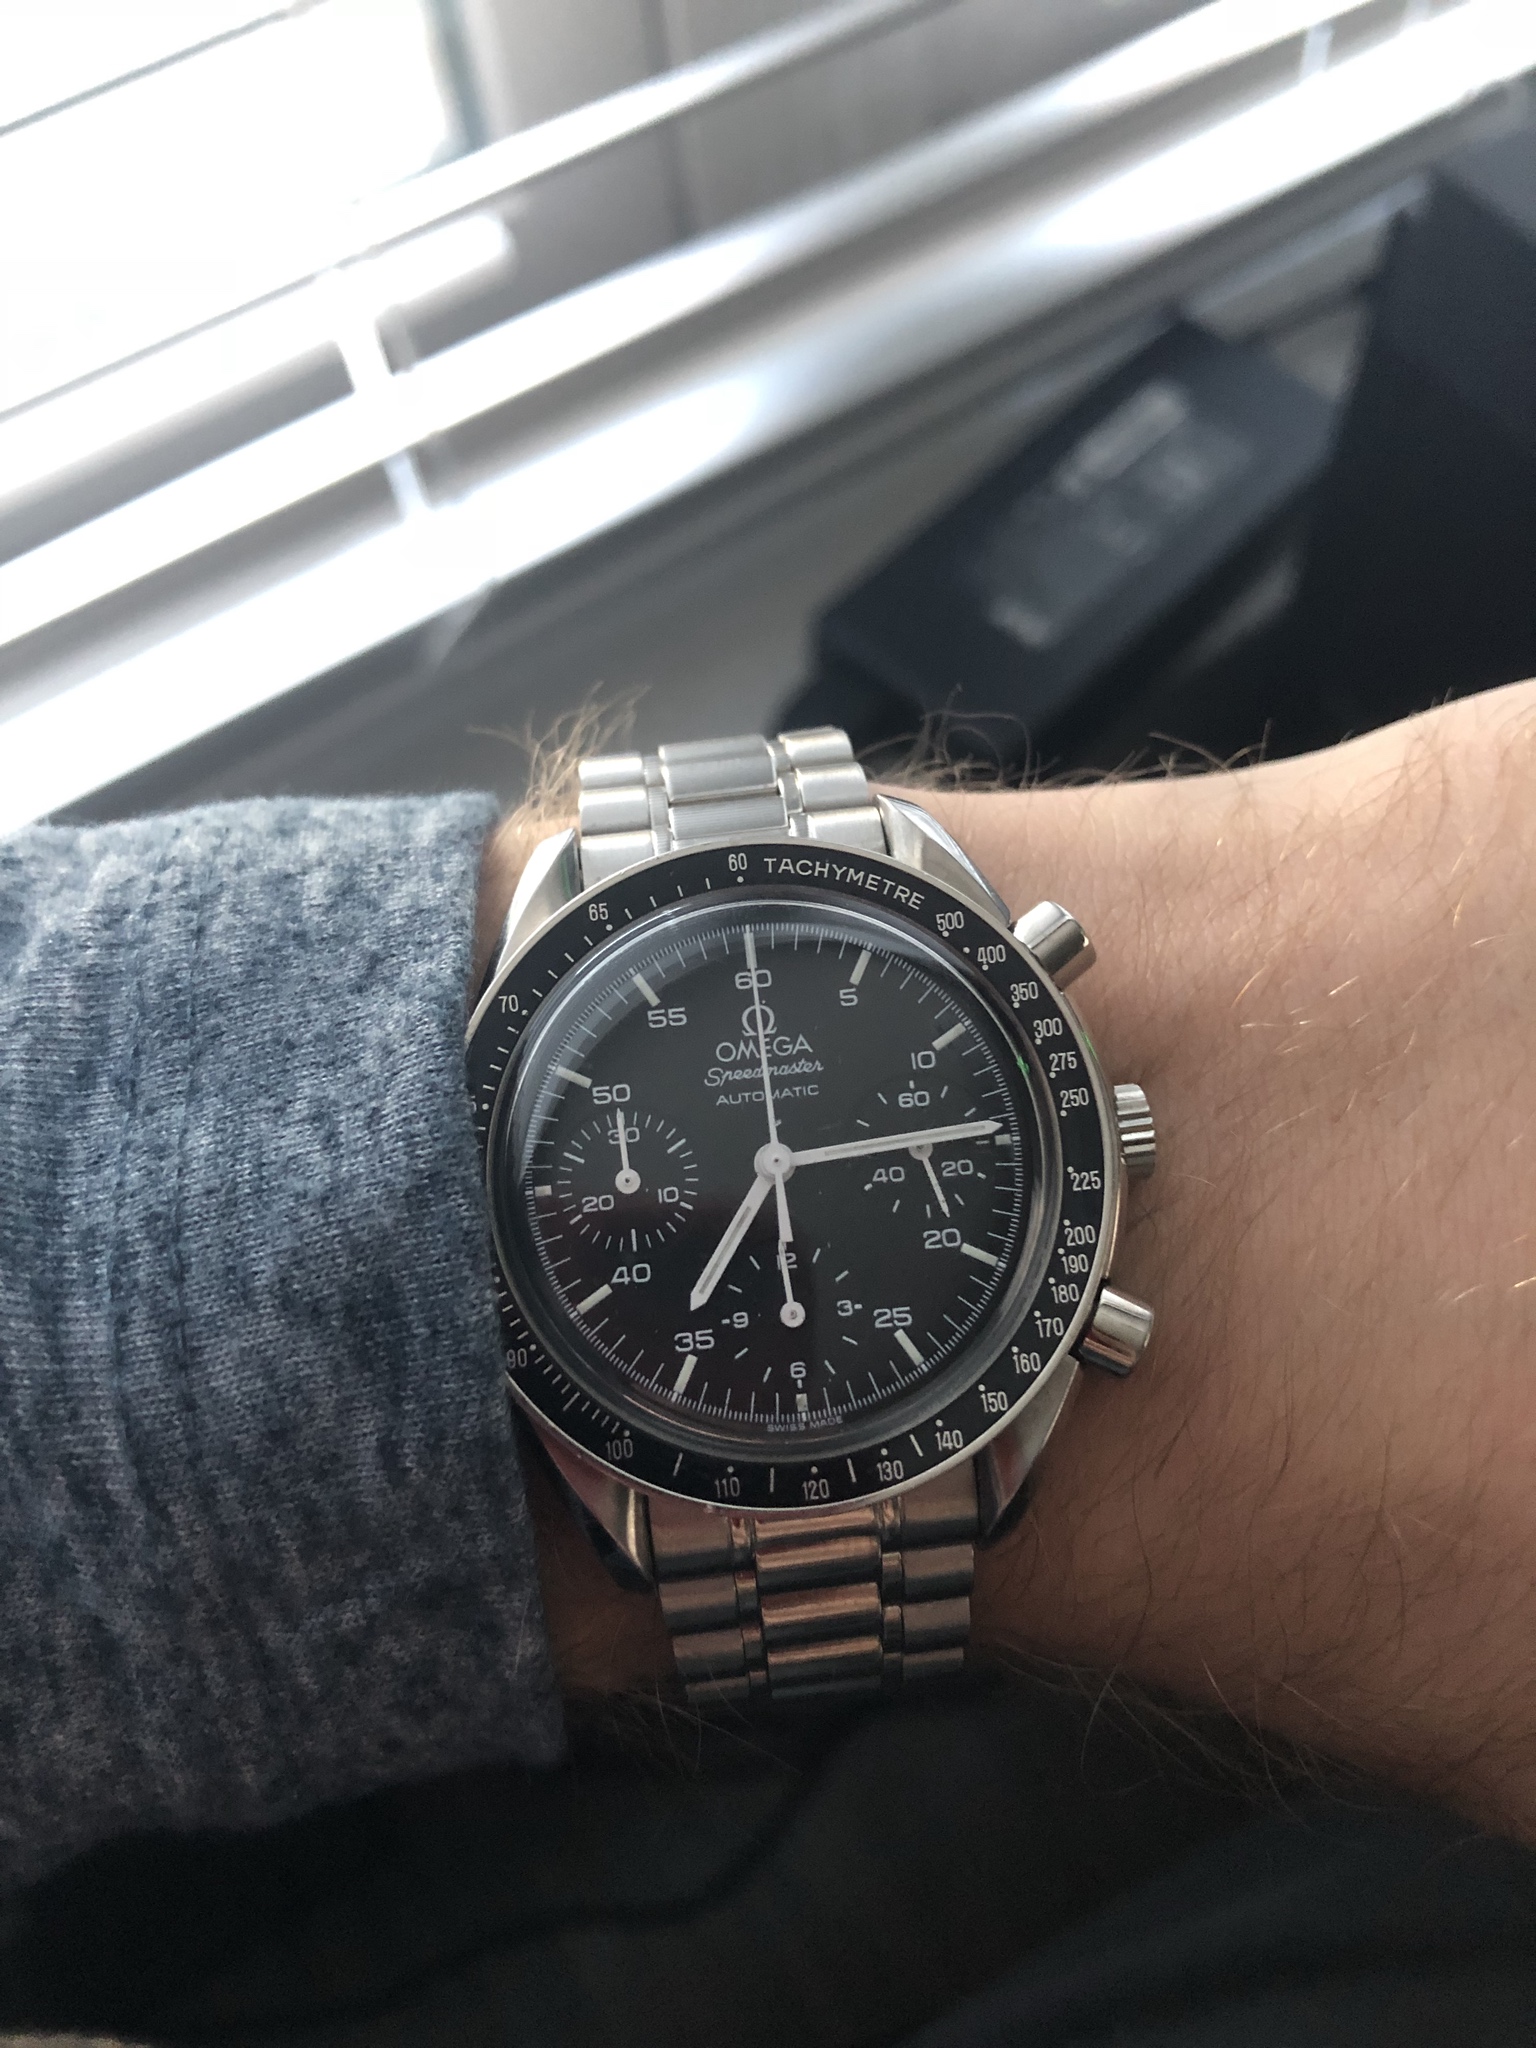 Wts Omega Speedmaster Reduced Compete Set 3510 50 Just Serviced Watchcharts